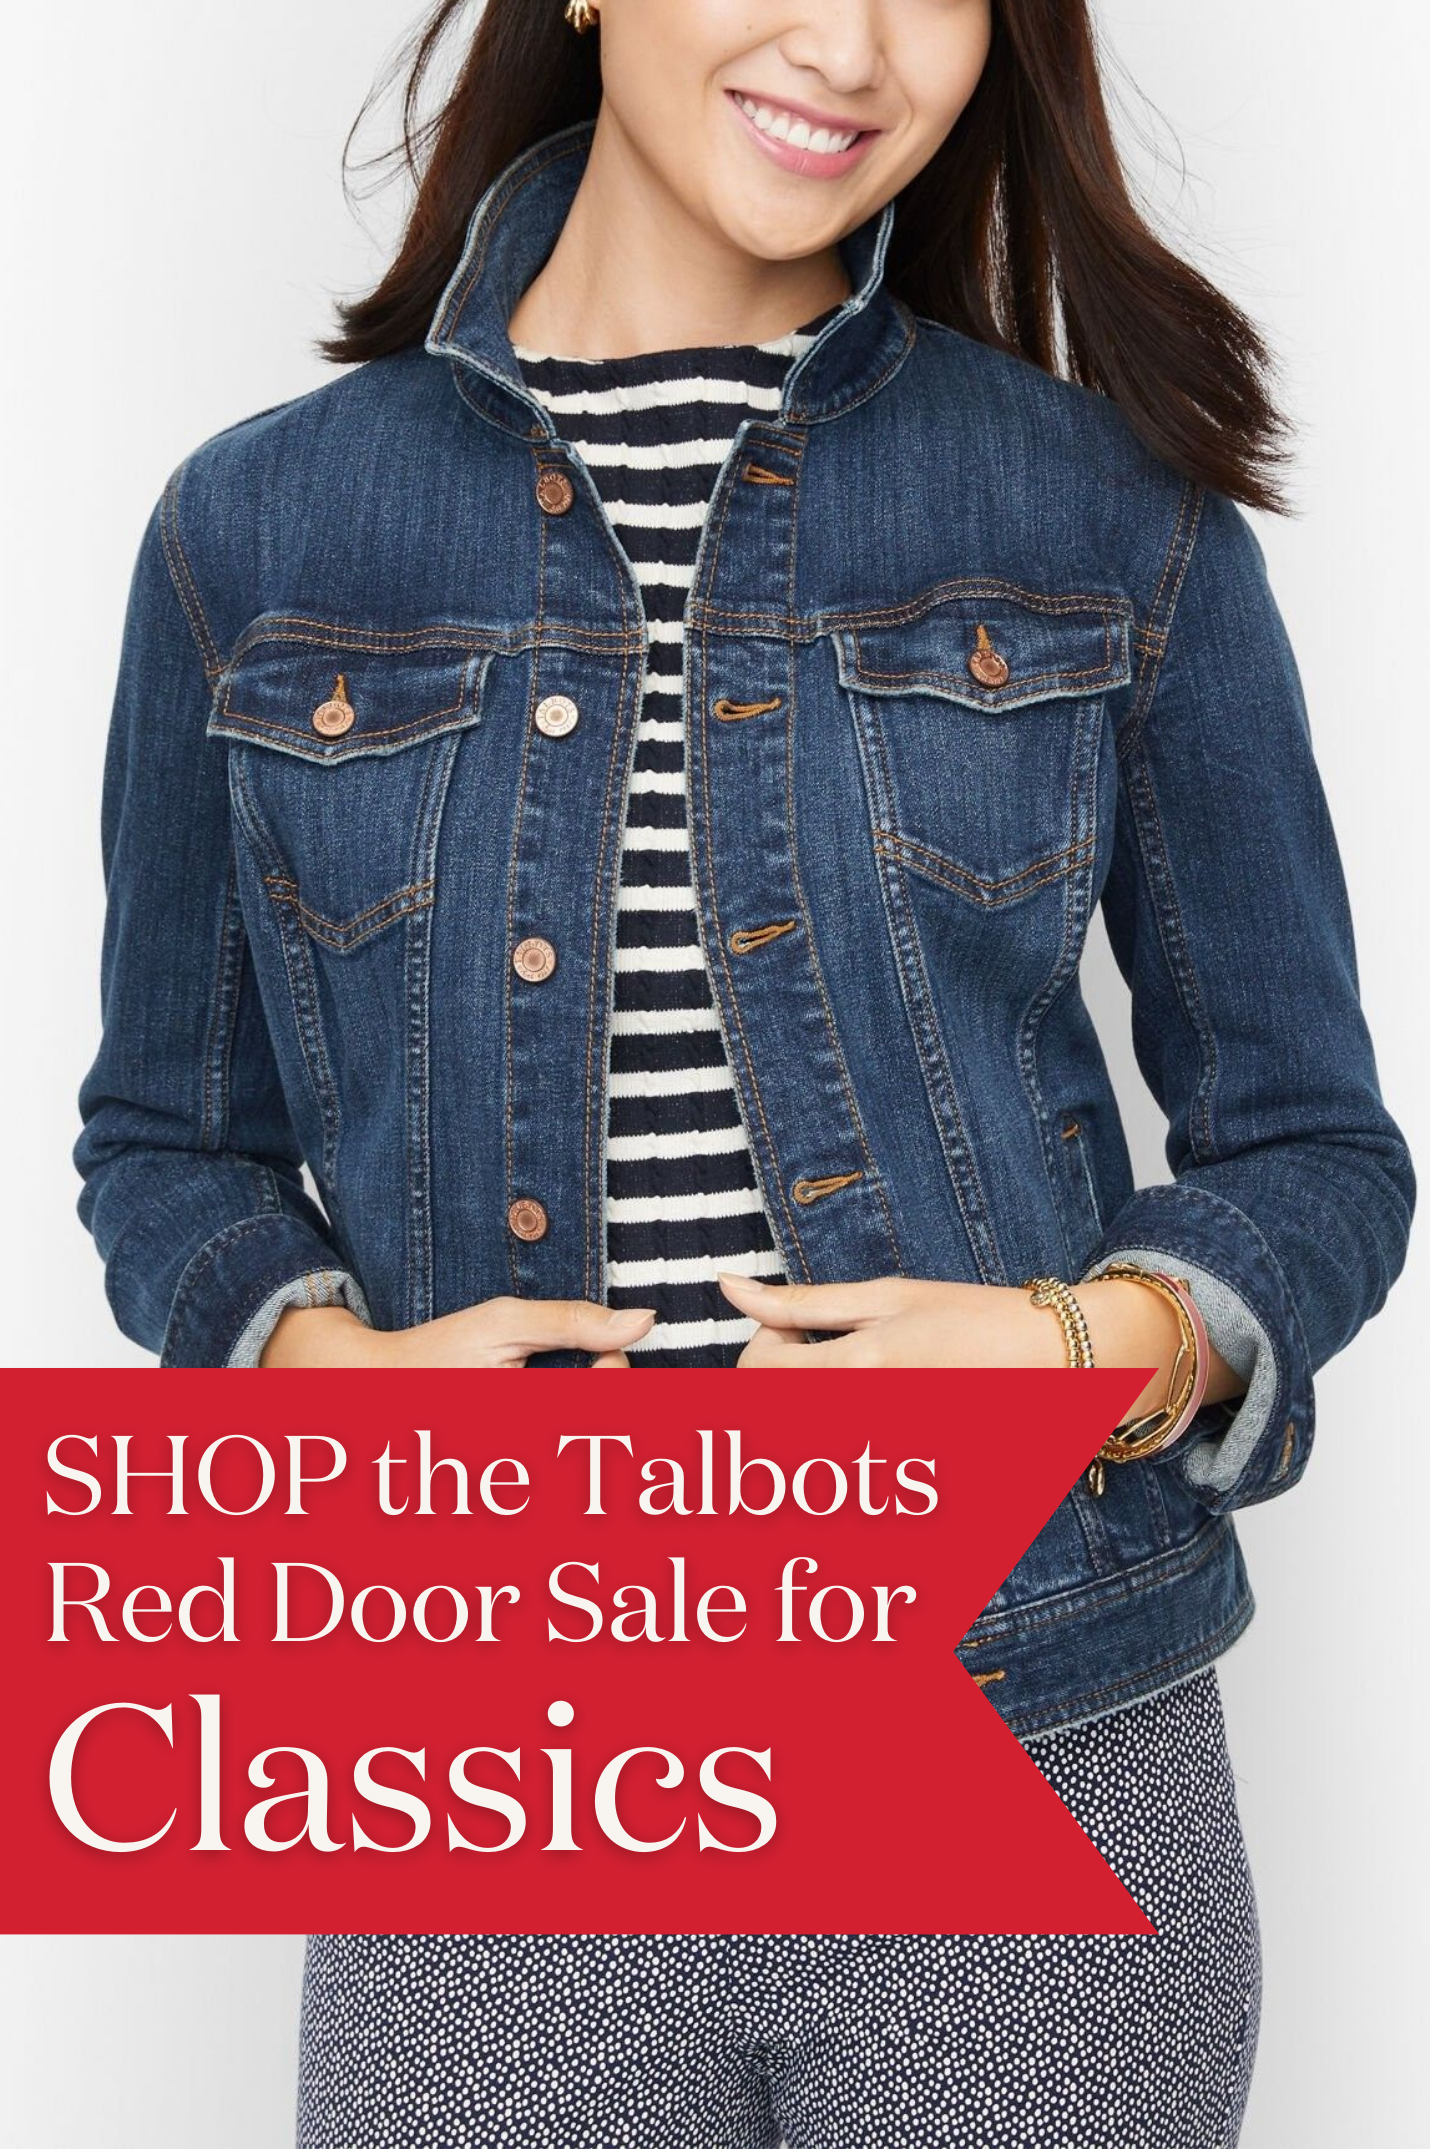 Shop the Talbots Red Door Sale for Classics